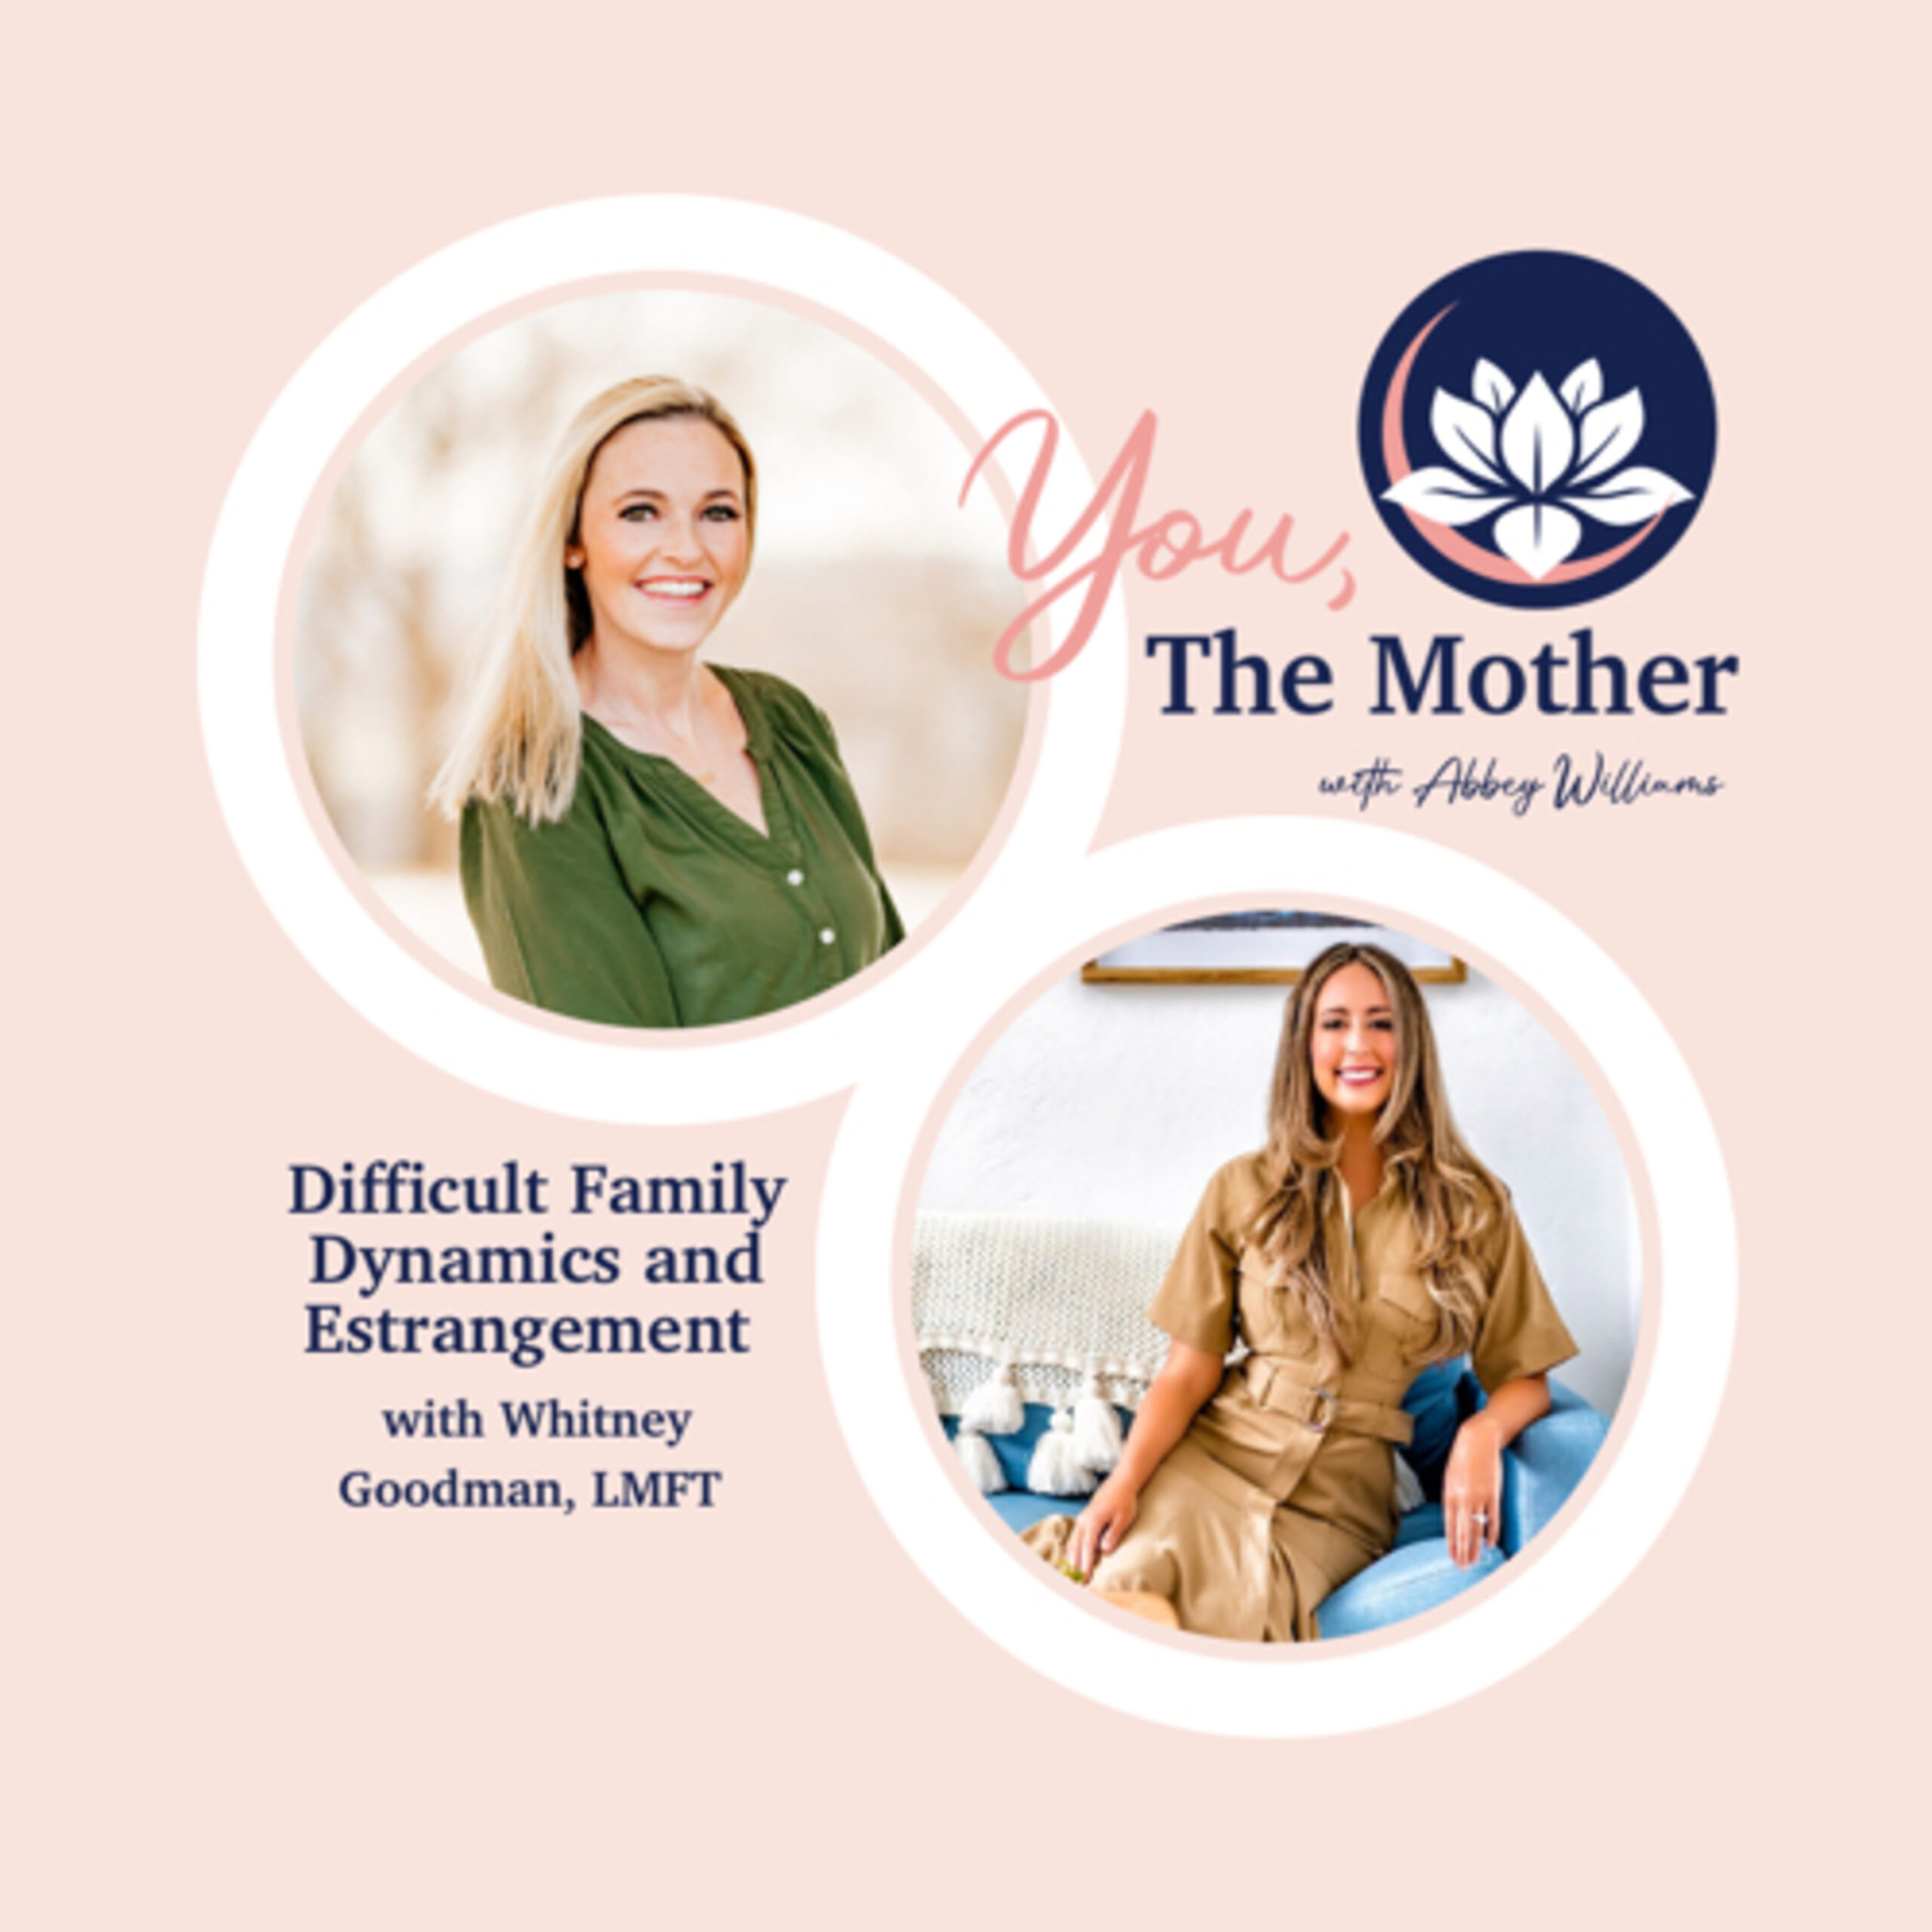 Difficult Family Dynamics and Estrangement with Whitney Goodman, LMFT